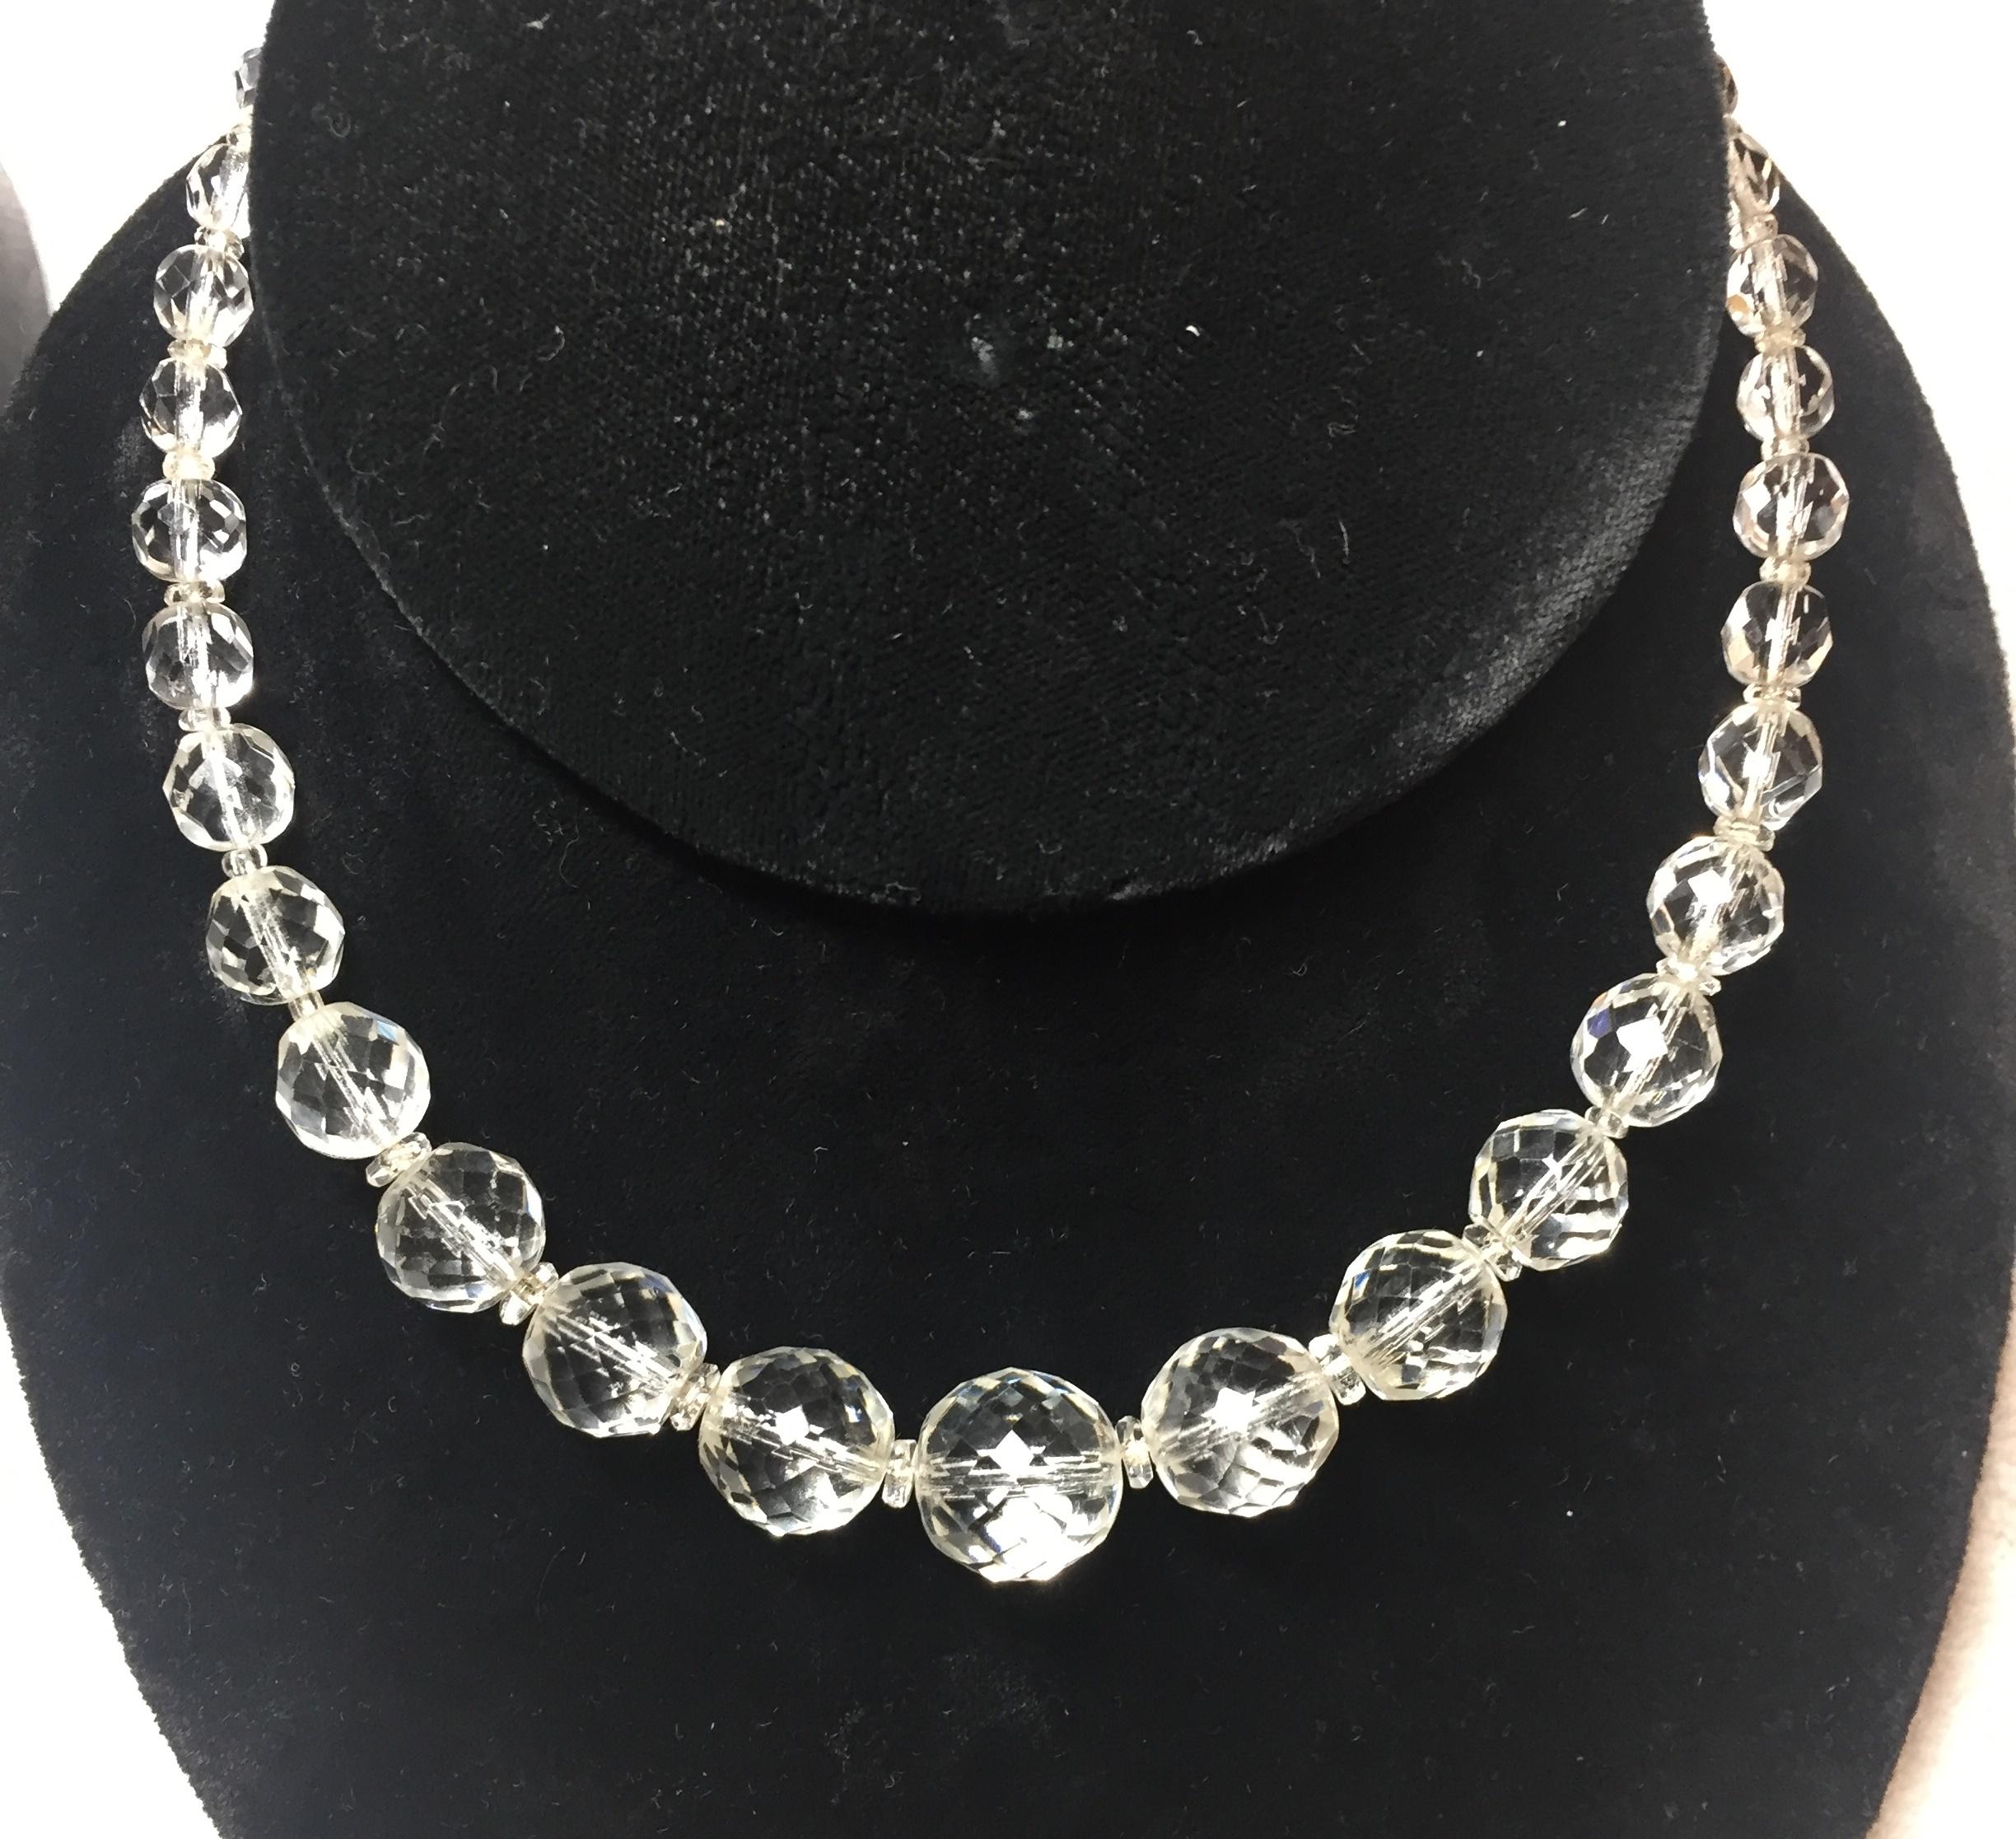 Offered here is an Edwardian cut lead crystal necklace and coordinating crystal & sterling screw-back earrings from the early 1900s. The highly-faceted crystals of the necklace are strung on silk cord, and graduate smoothly from 0.25